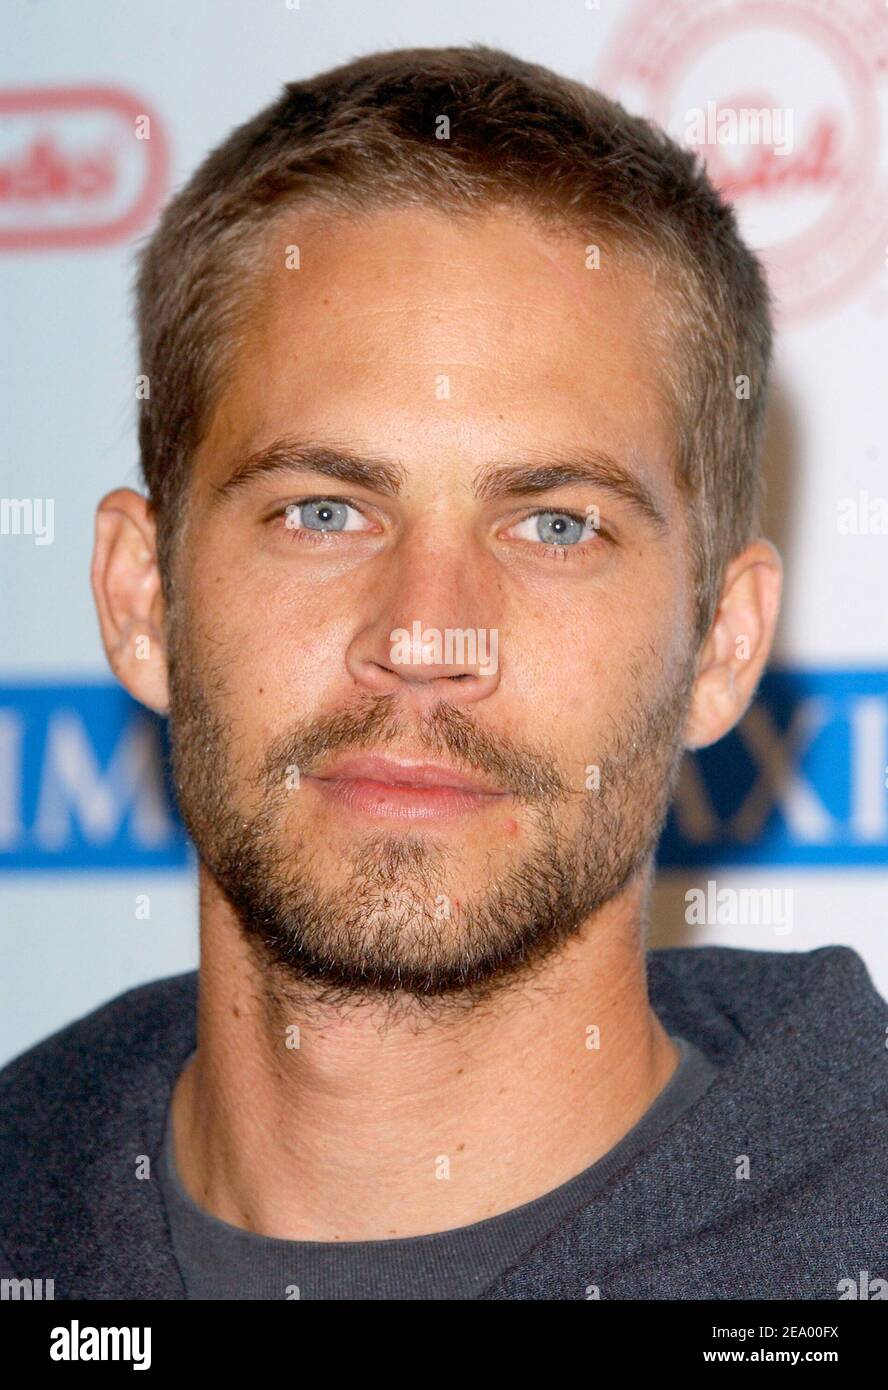 US actor Paul Walker who starred in the Fast & Furious series of action films has been killed in a car crash in California on November 30, 2013. A statement on his Facebook page said Walker, 40, had been a passenger in a friend's car which crashed north of Los Angeles. He was said to be attending a charity event at the time. File photo : Paul Walker at the Maxim Magazine 'Maximony' Super Bowl Party at the Garden Club in Jacksonville, FL on February 5, 2005. Photo By Lionel Hahn/ABACA Stock Photo